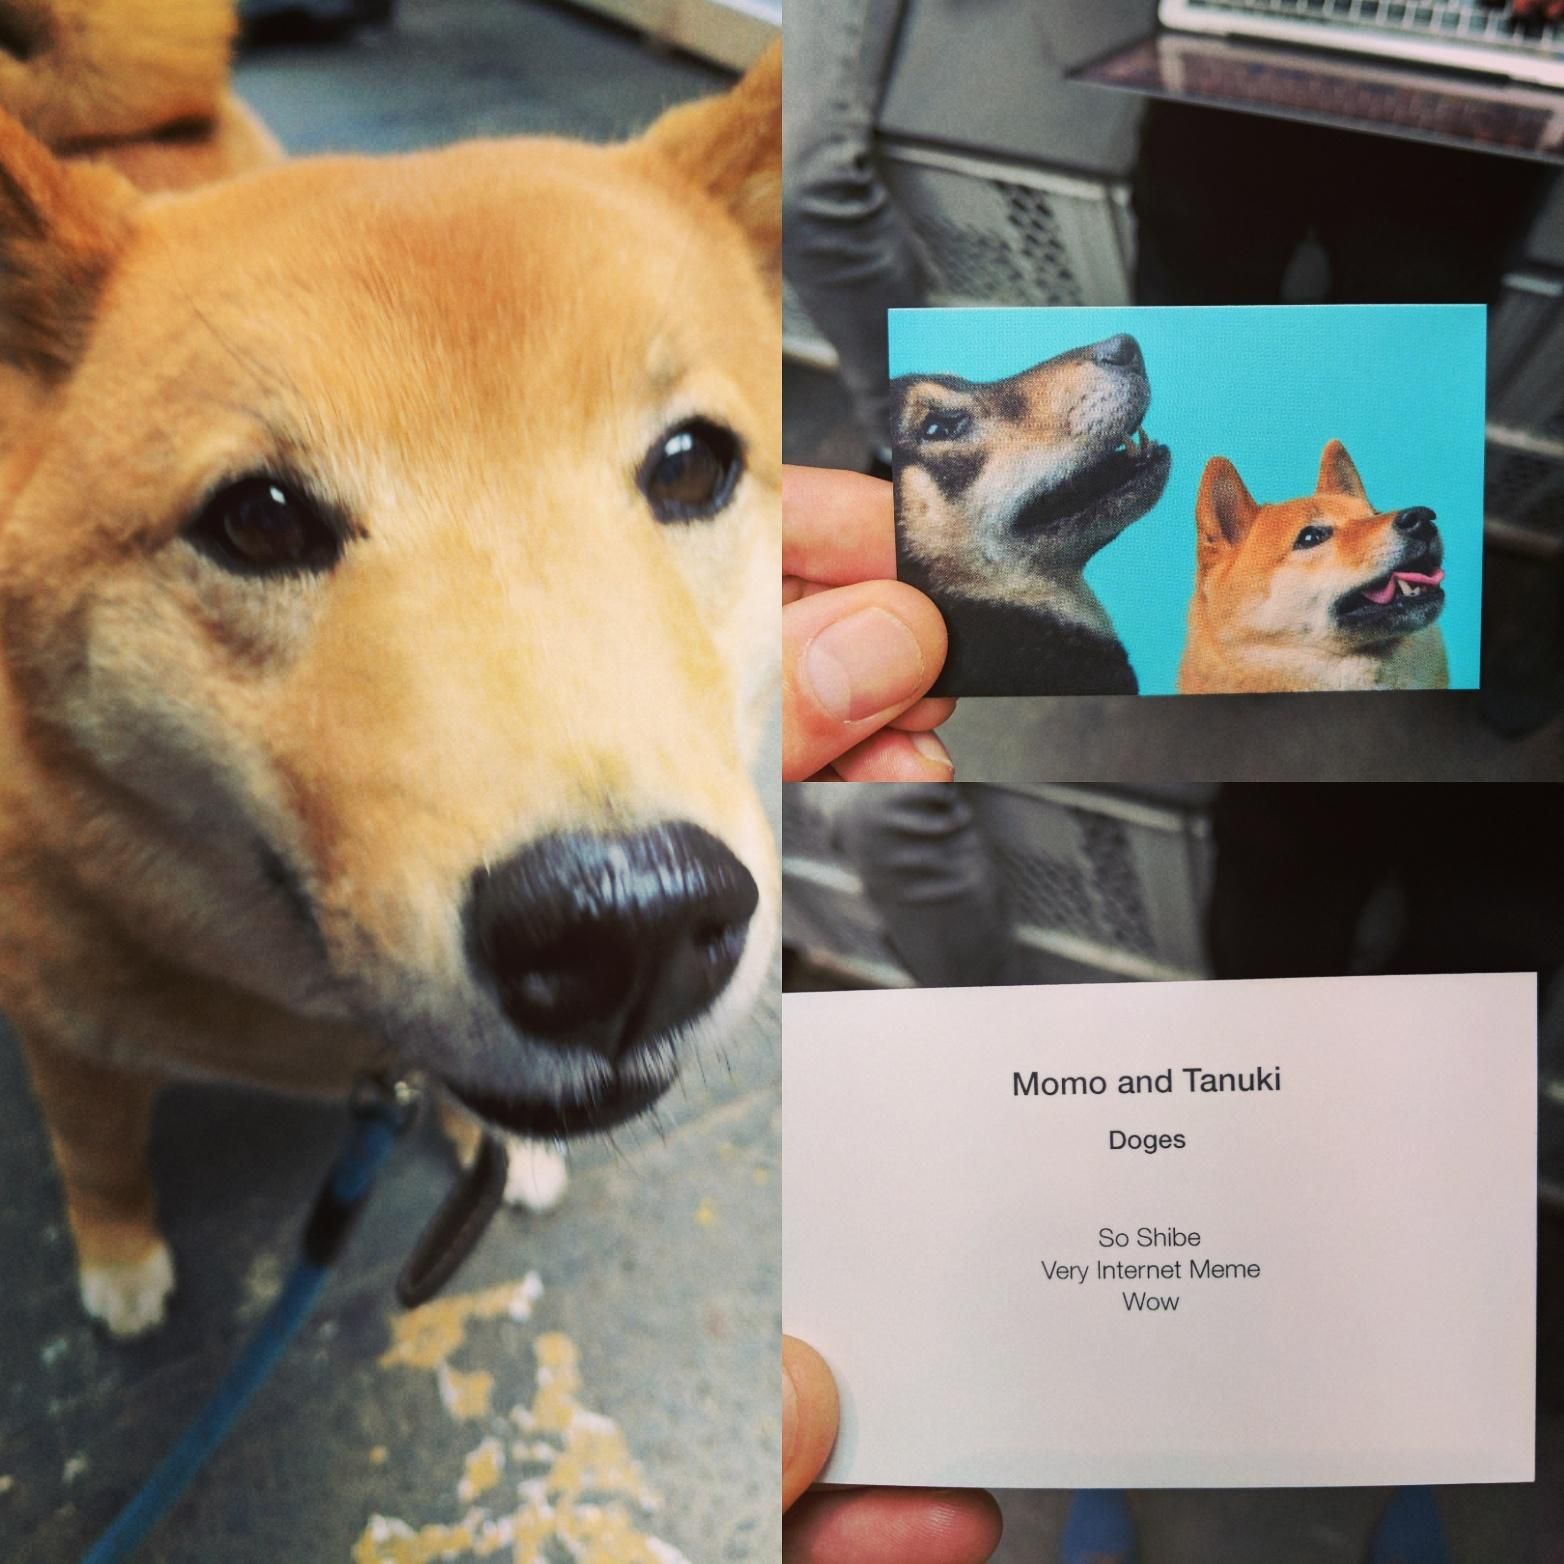 Ran into a guy on a conference with a doge. He handed me this business card, and told me he worked for a bank. Then he left.